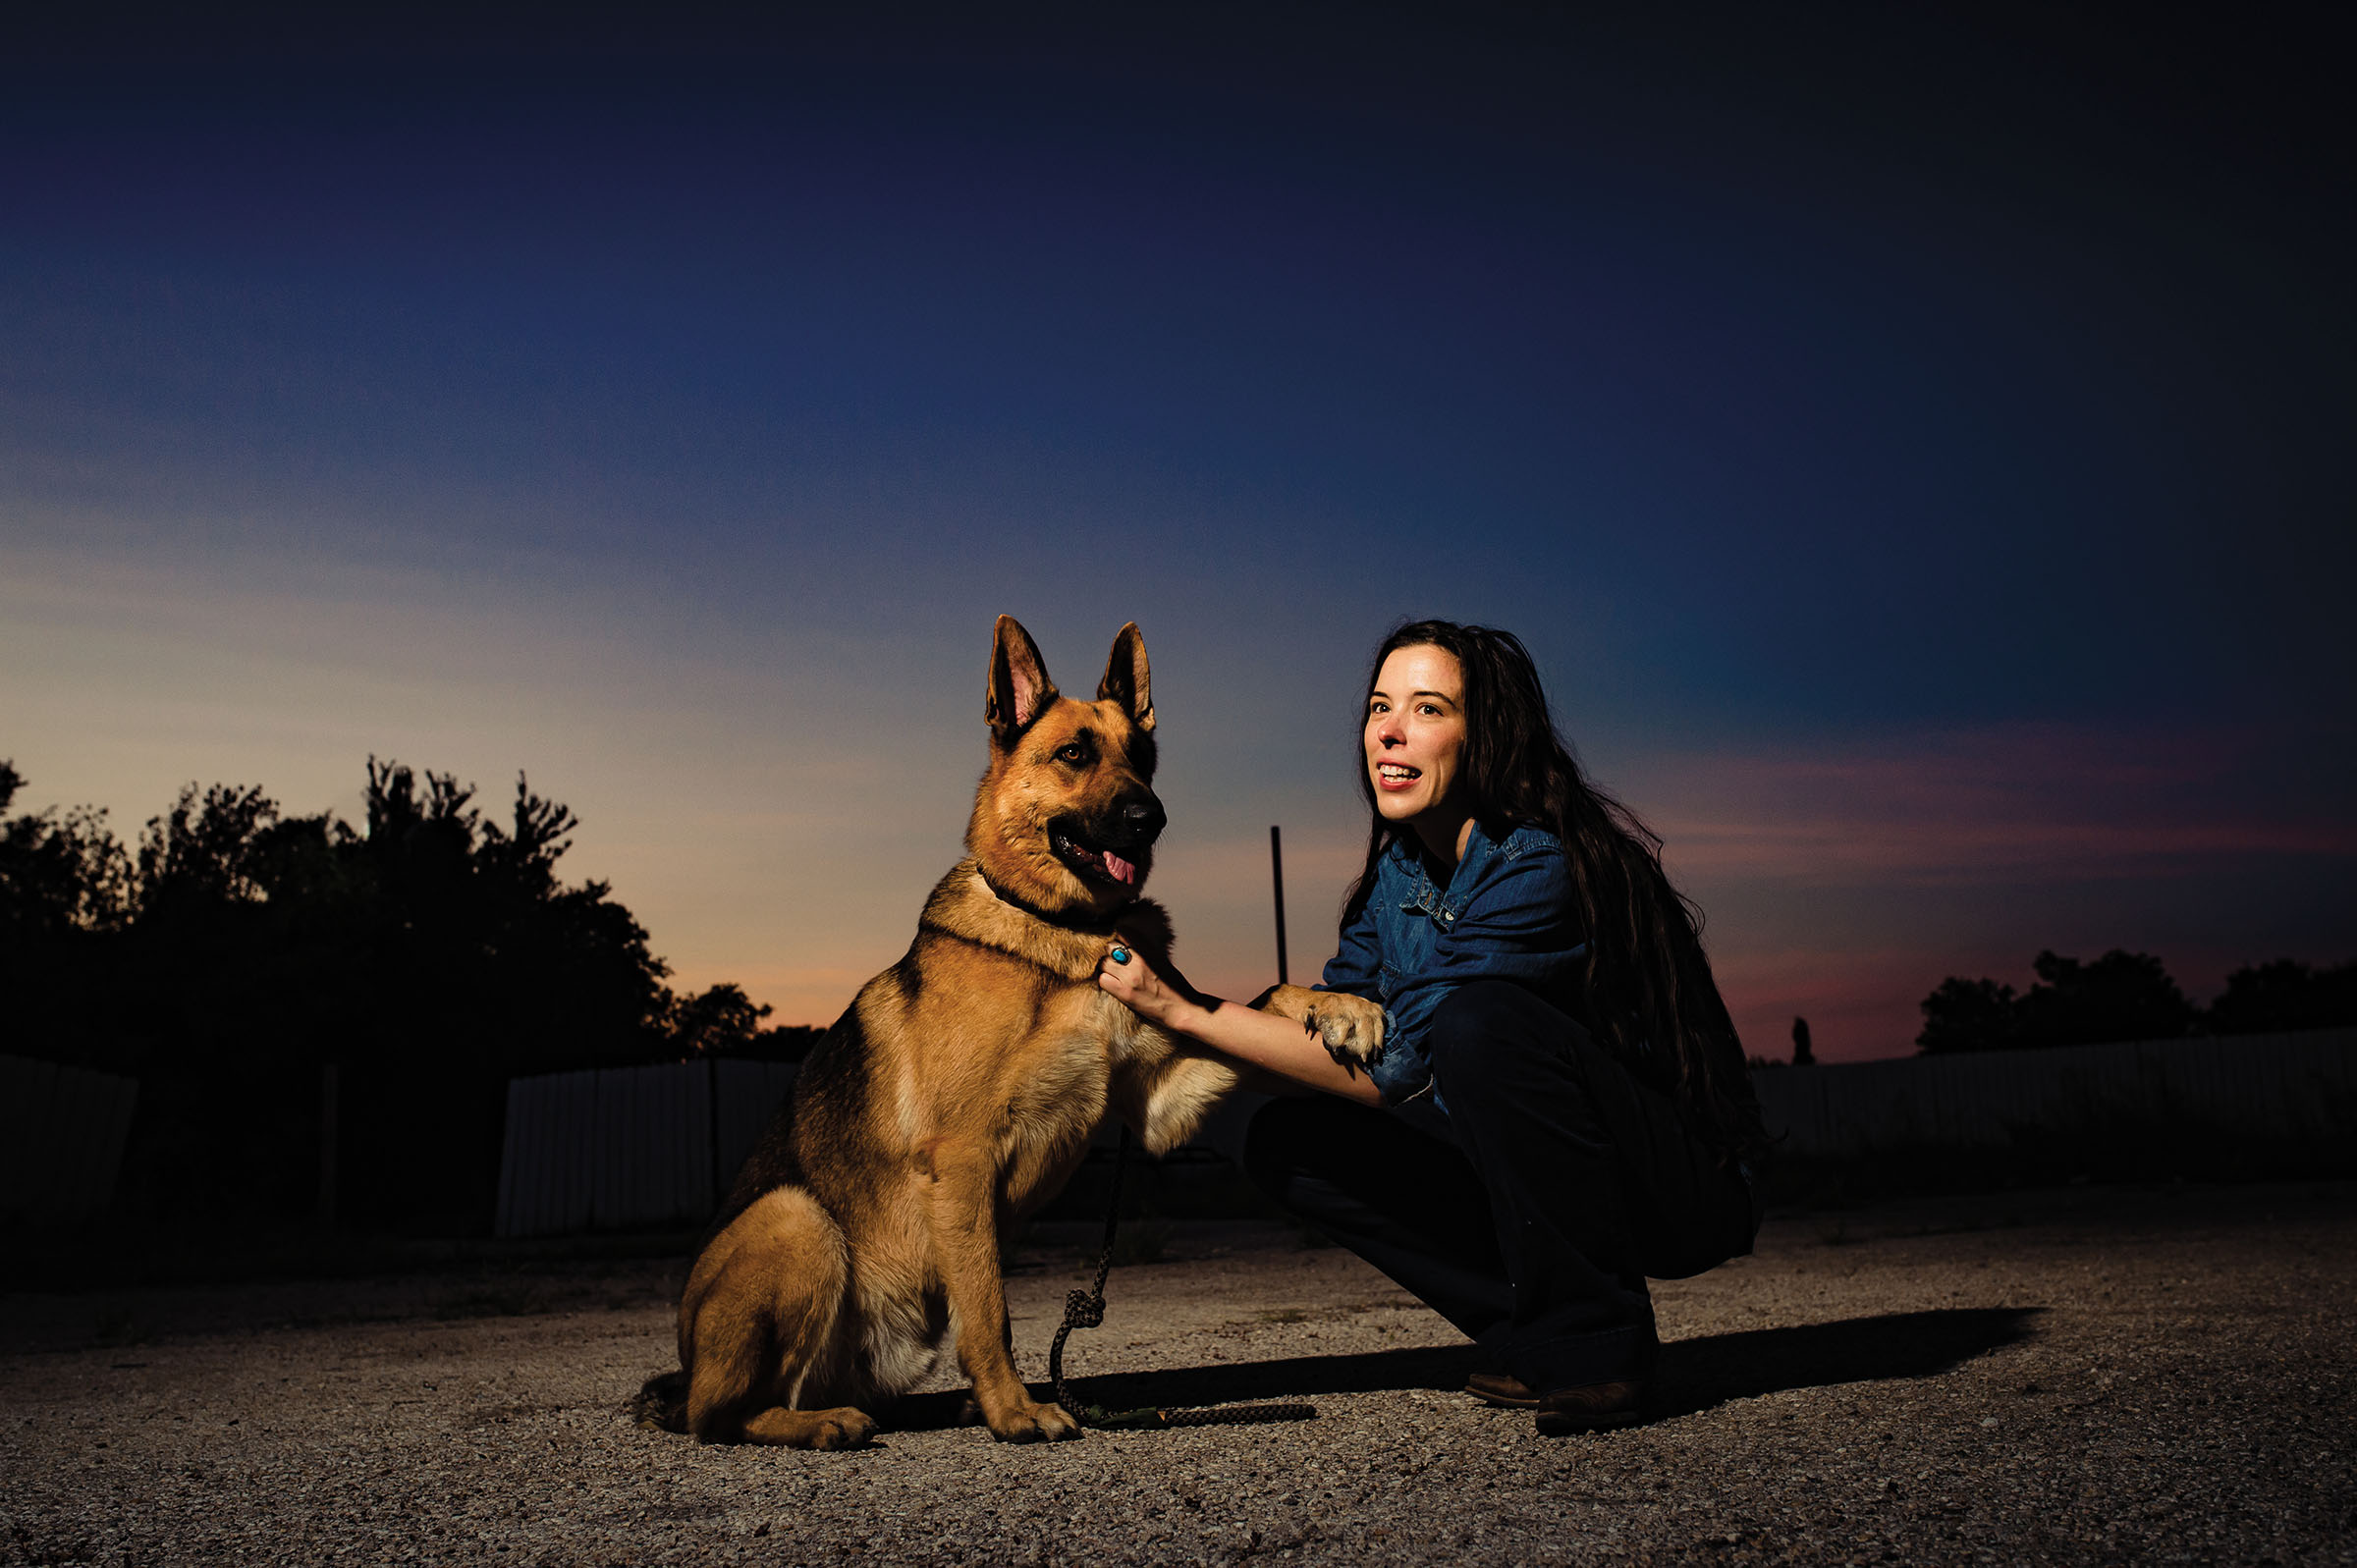 A woman in a blue shirt squats down in the dark next to a german shepherd